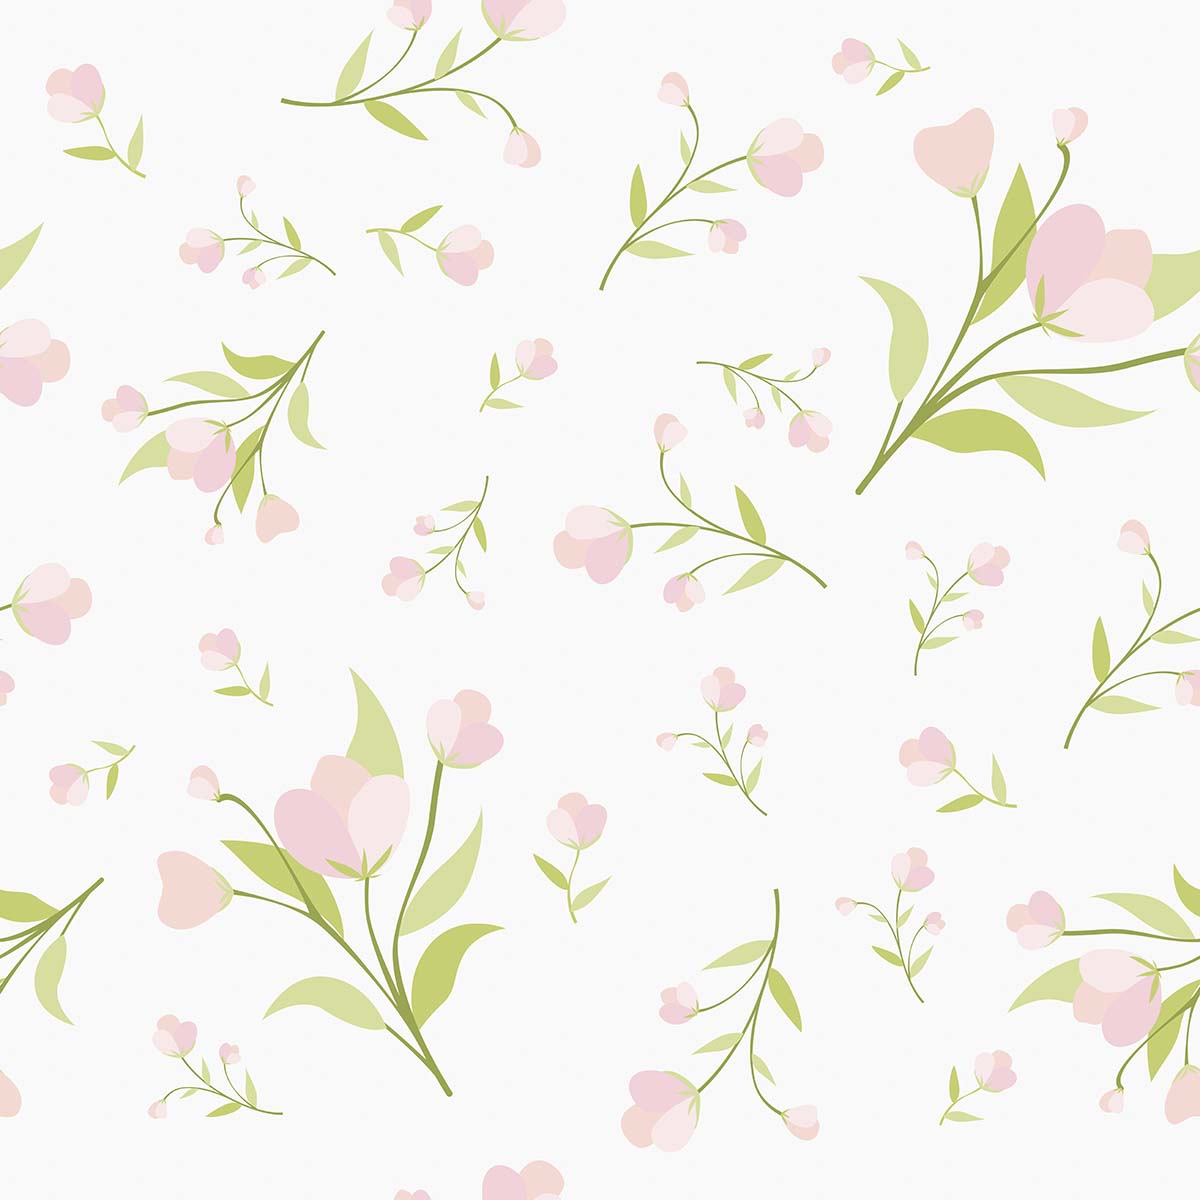 A pattern of pink flowers and green leaves